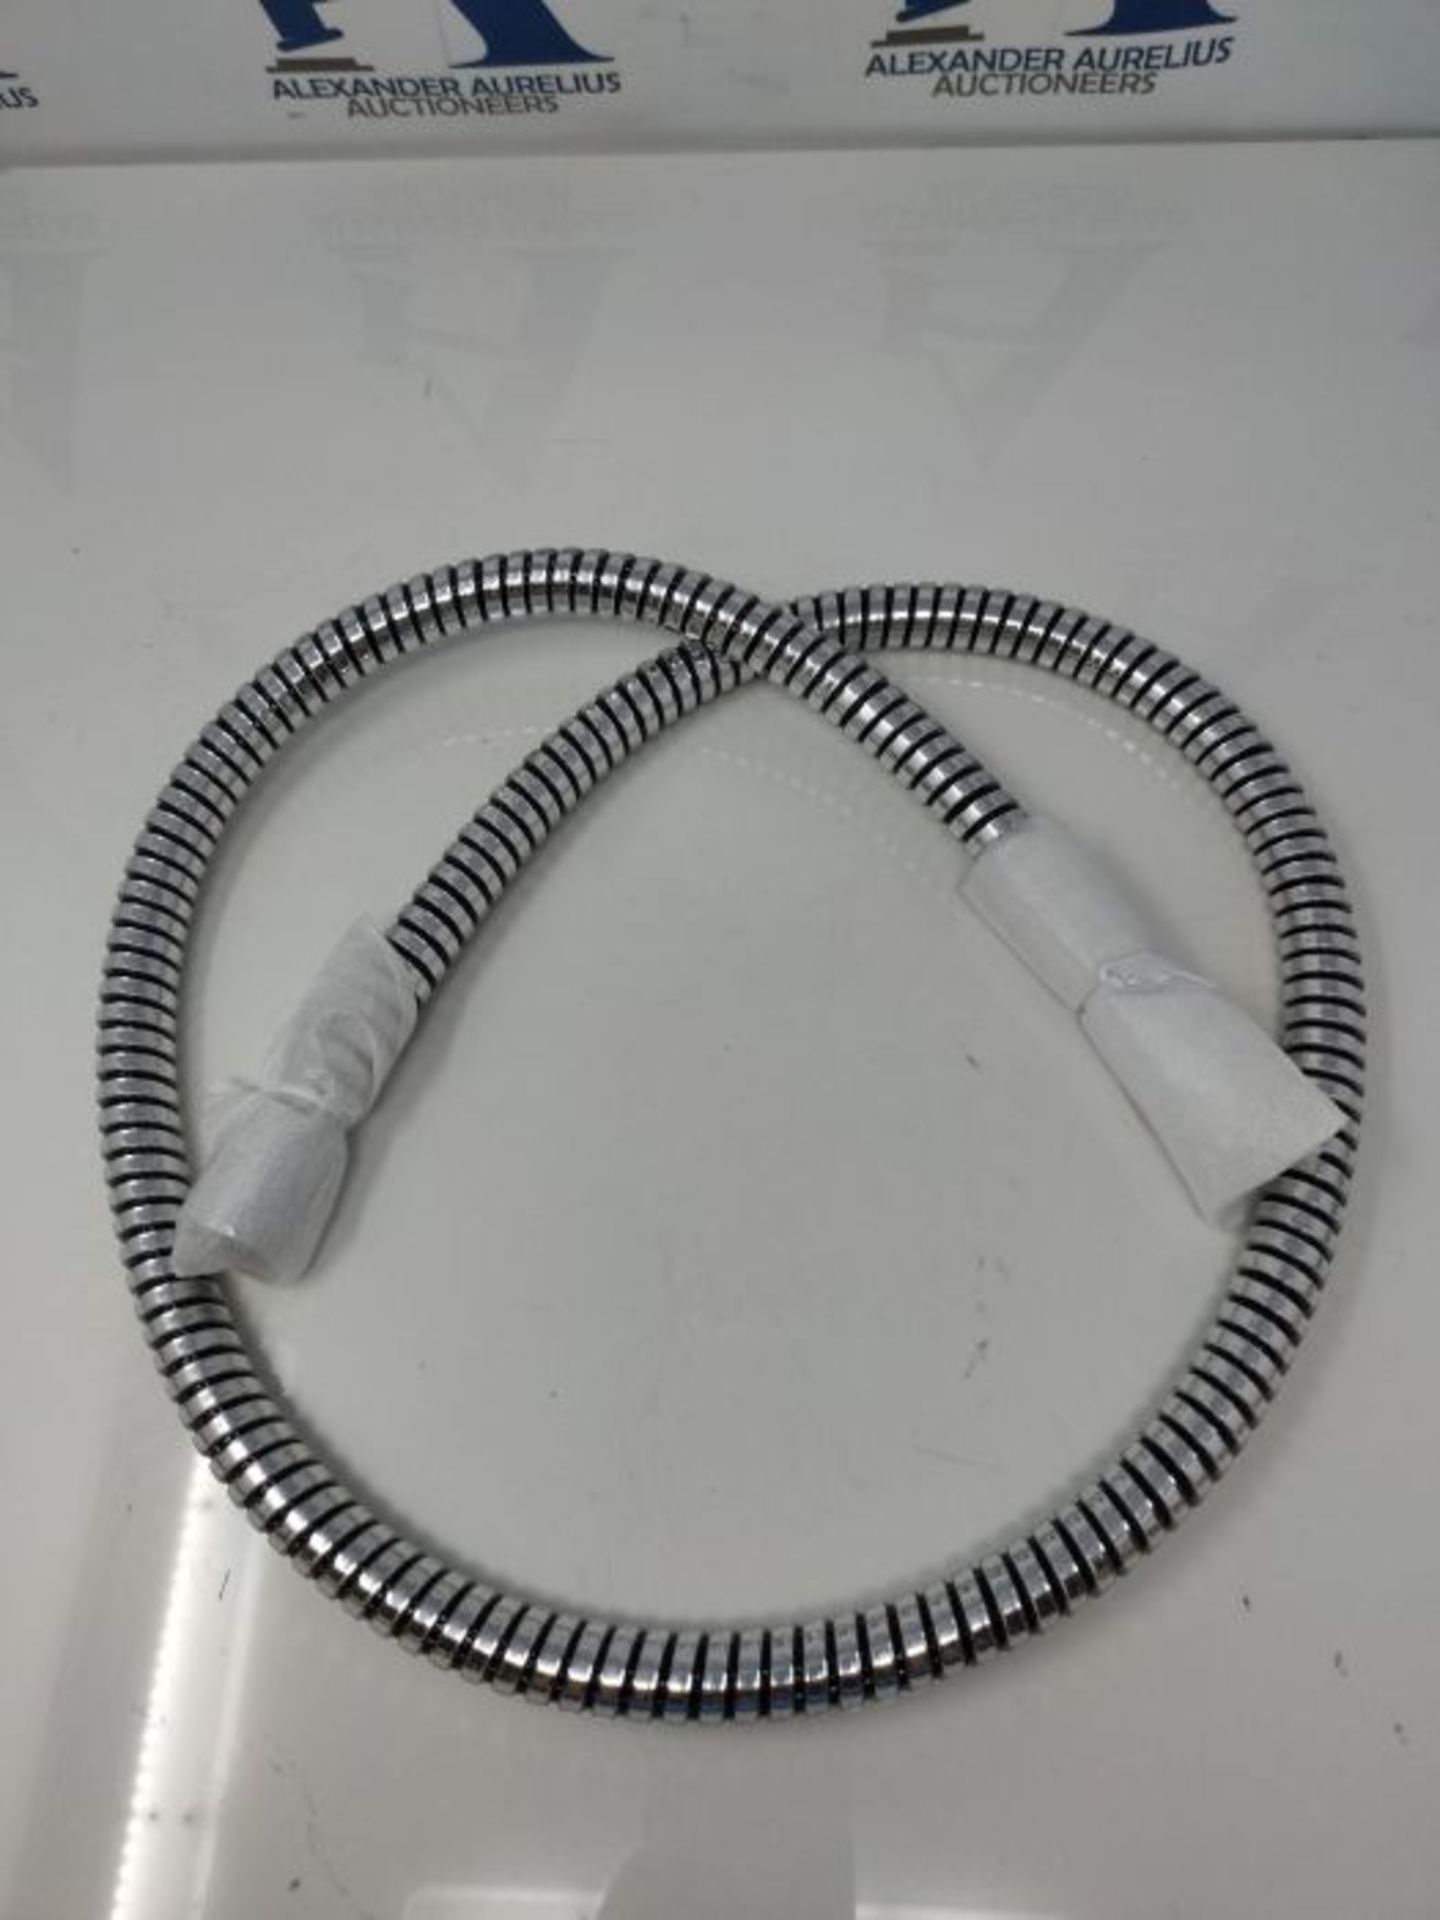 Aqualisa 235019 Shower Hose - 1.25m - Stainless Steel - Chrome - Image 3 of 3